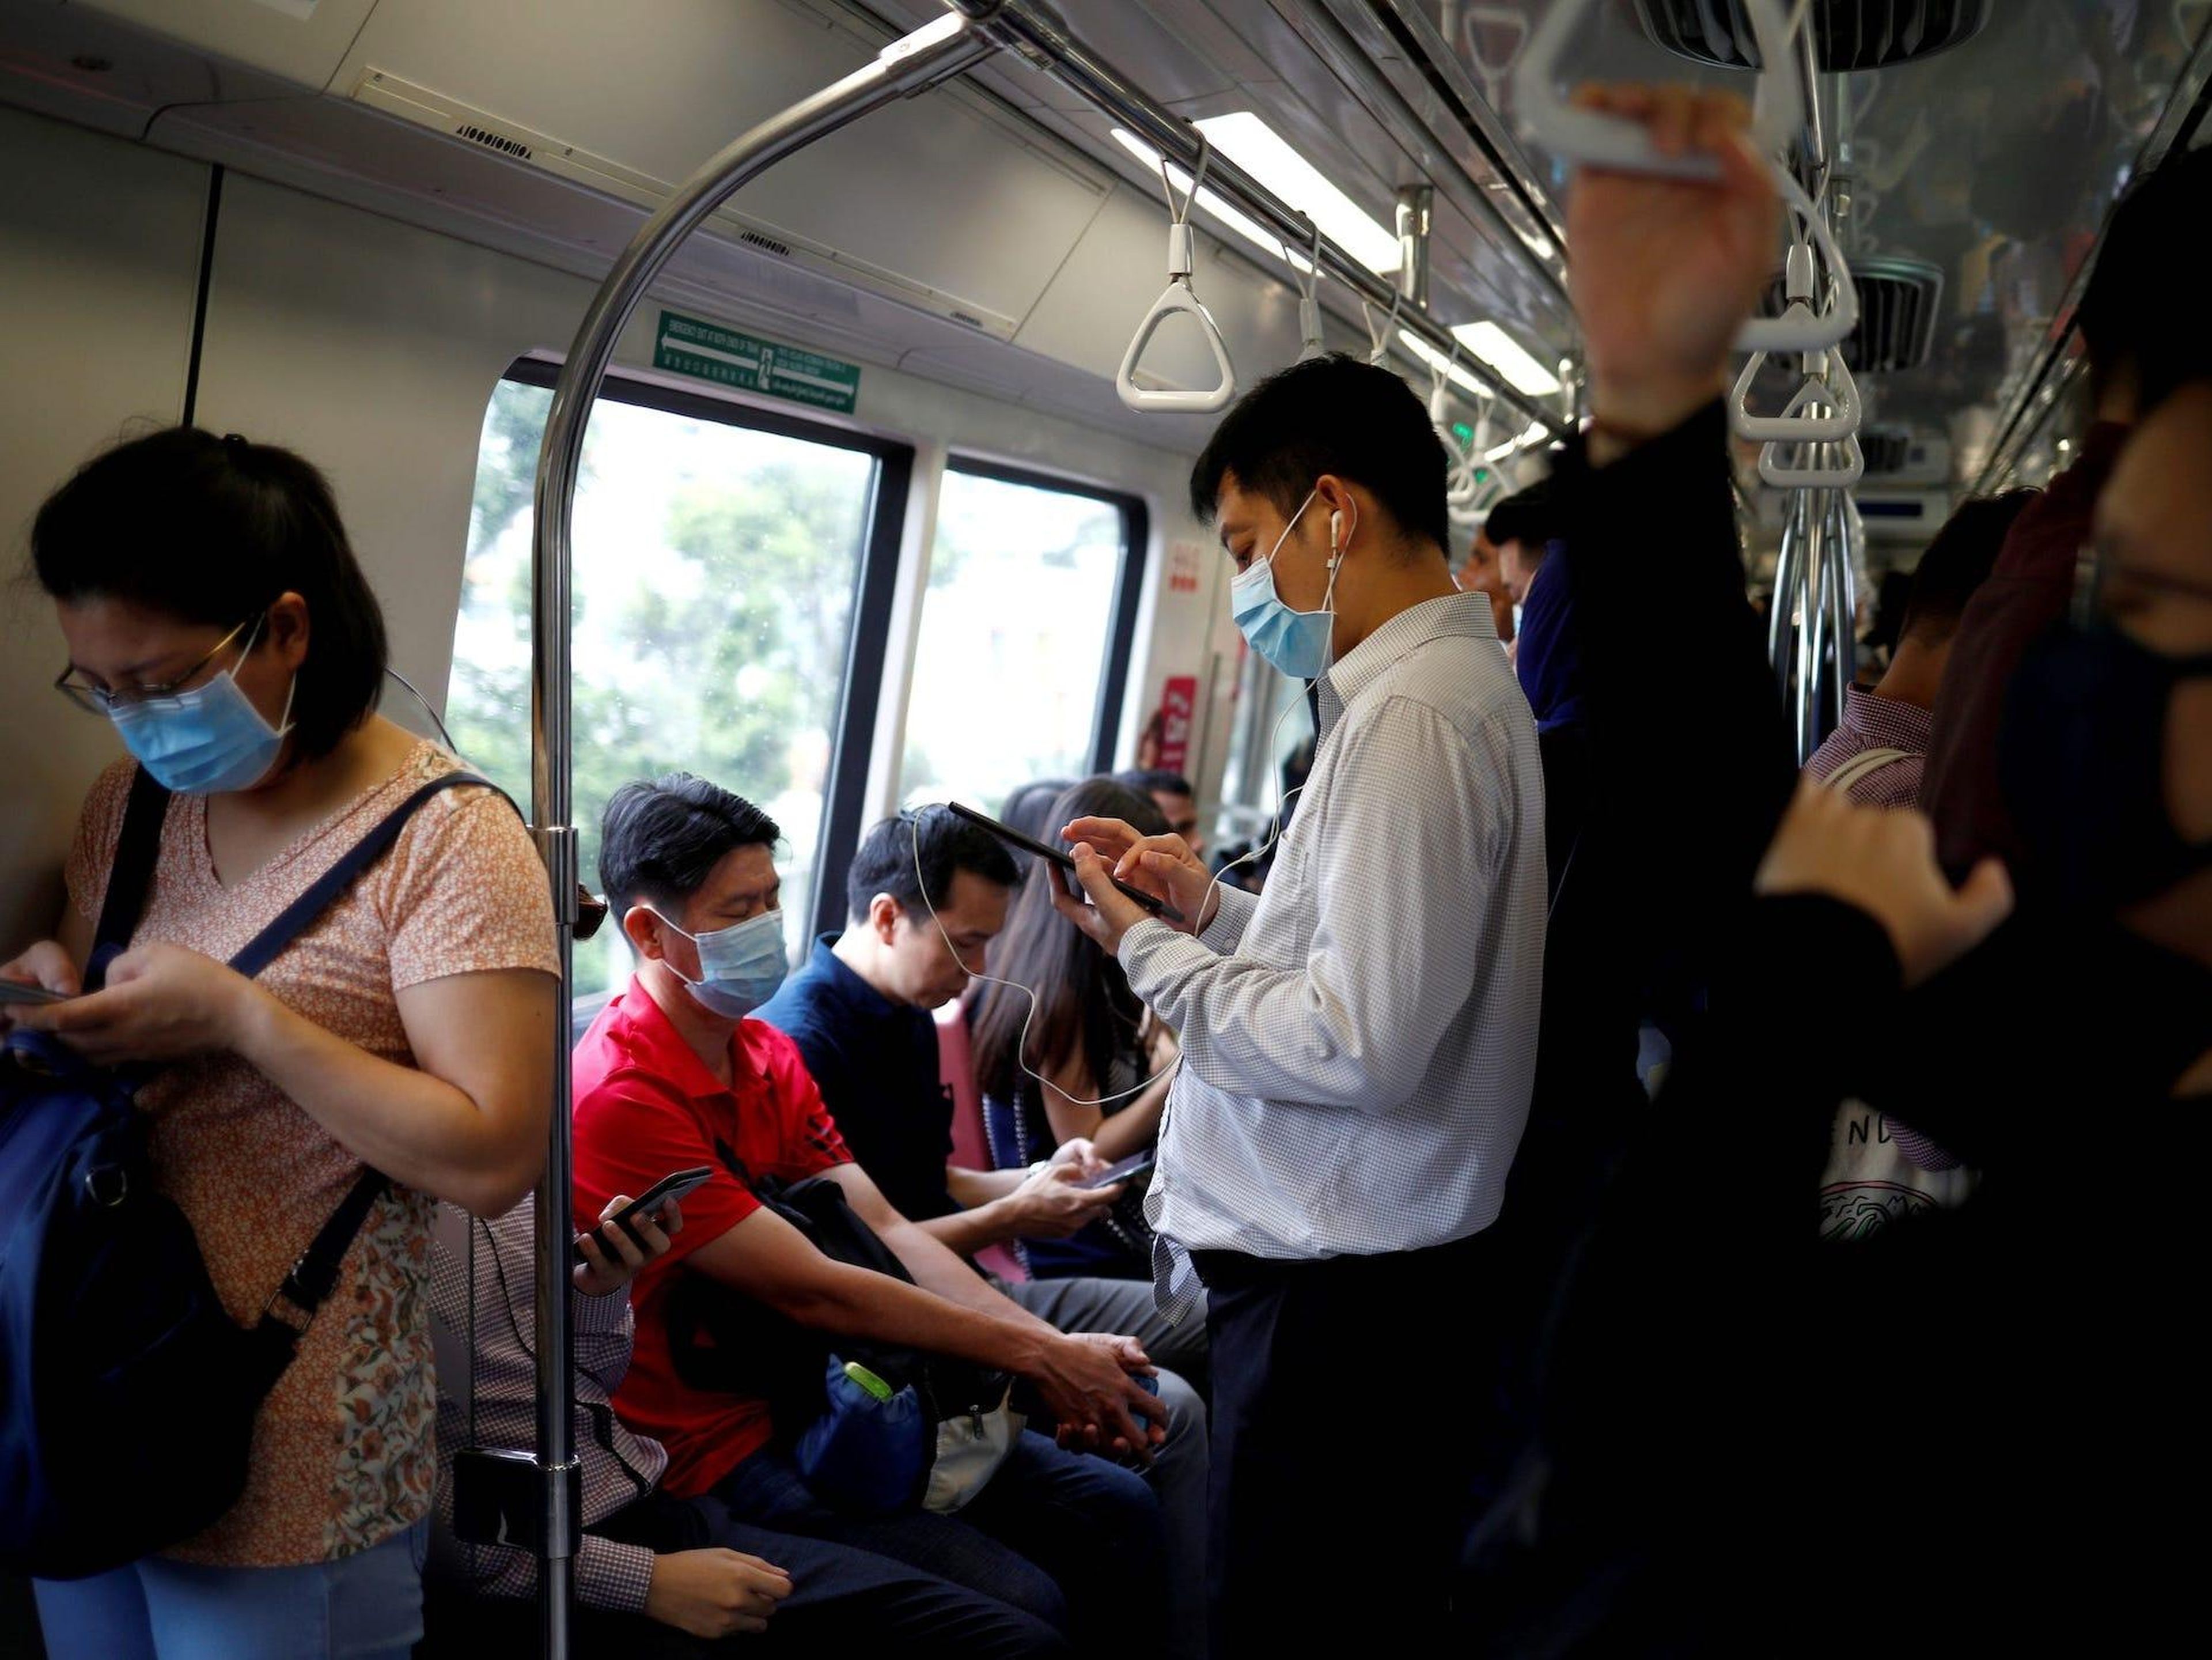 Commuters wearing masks in precaution of the coronavirus outbreak are pictured in a train during their morning commute in Singapore February 18, 2020.